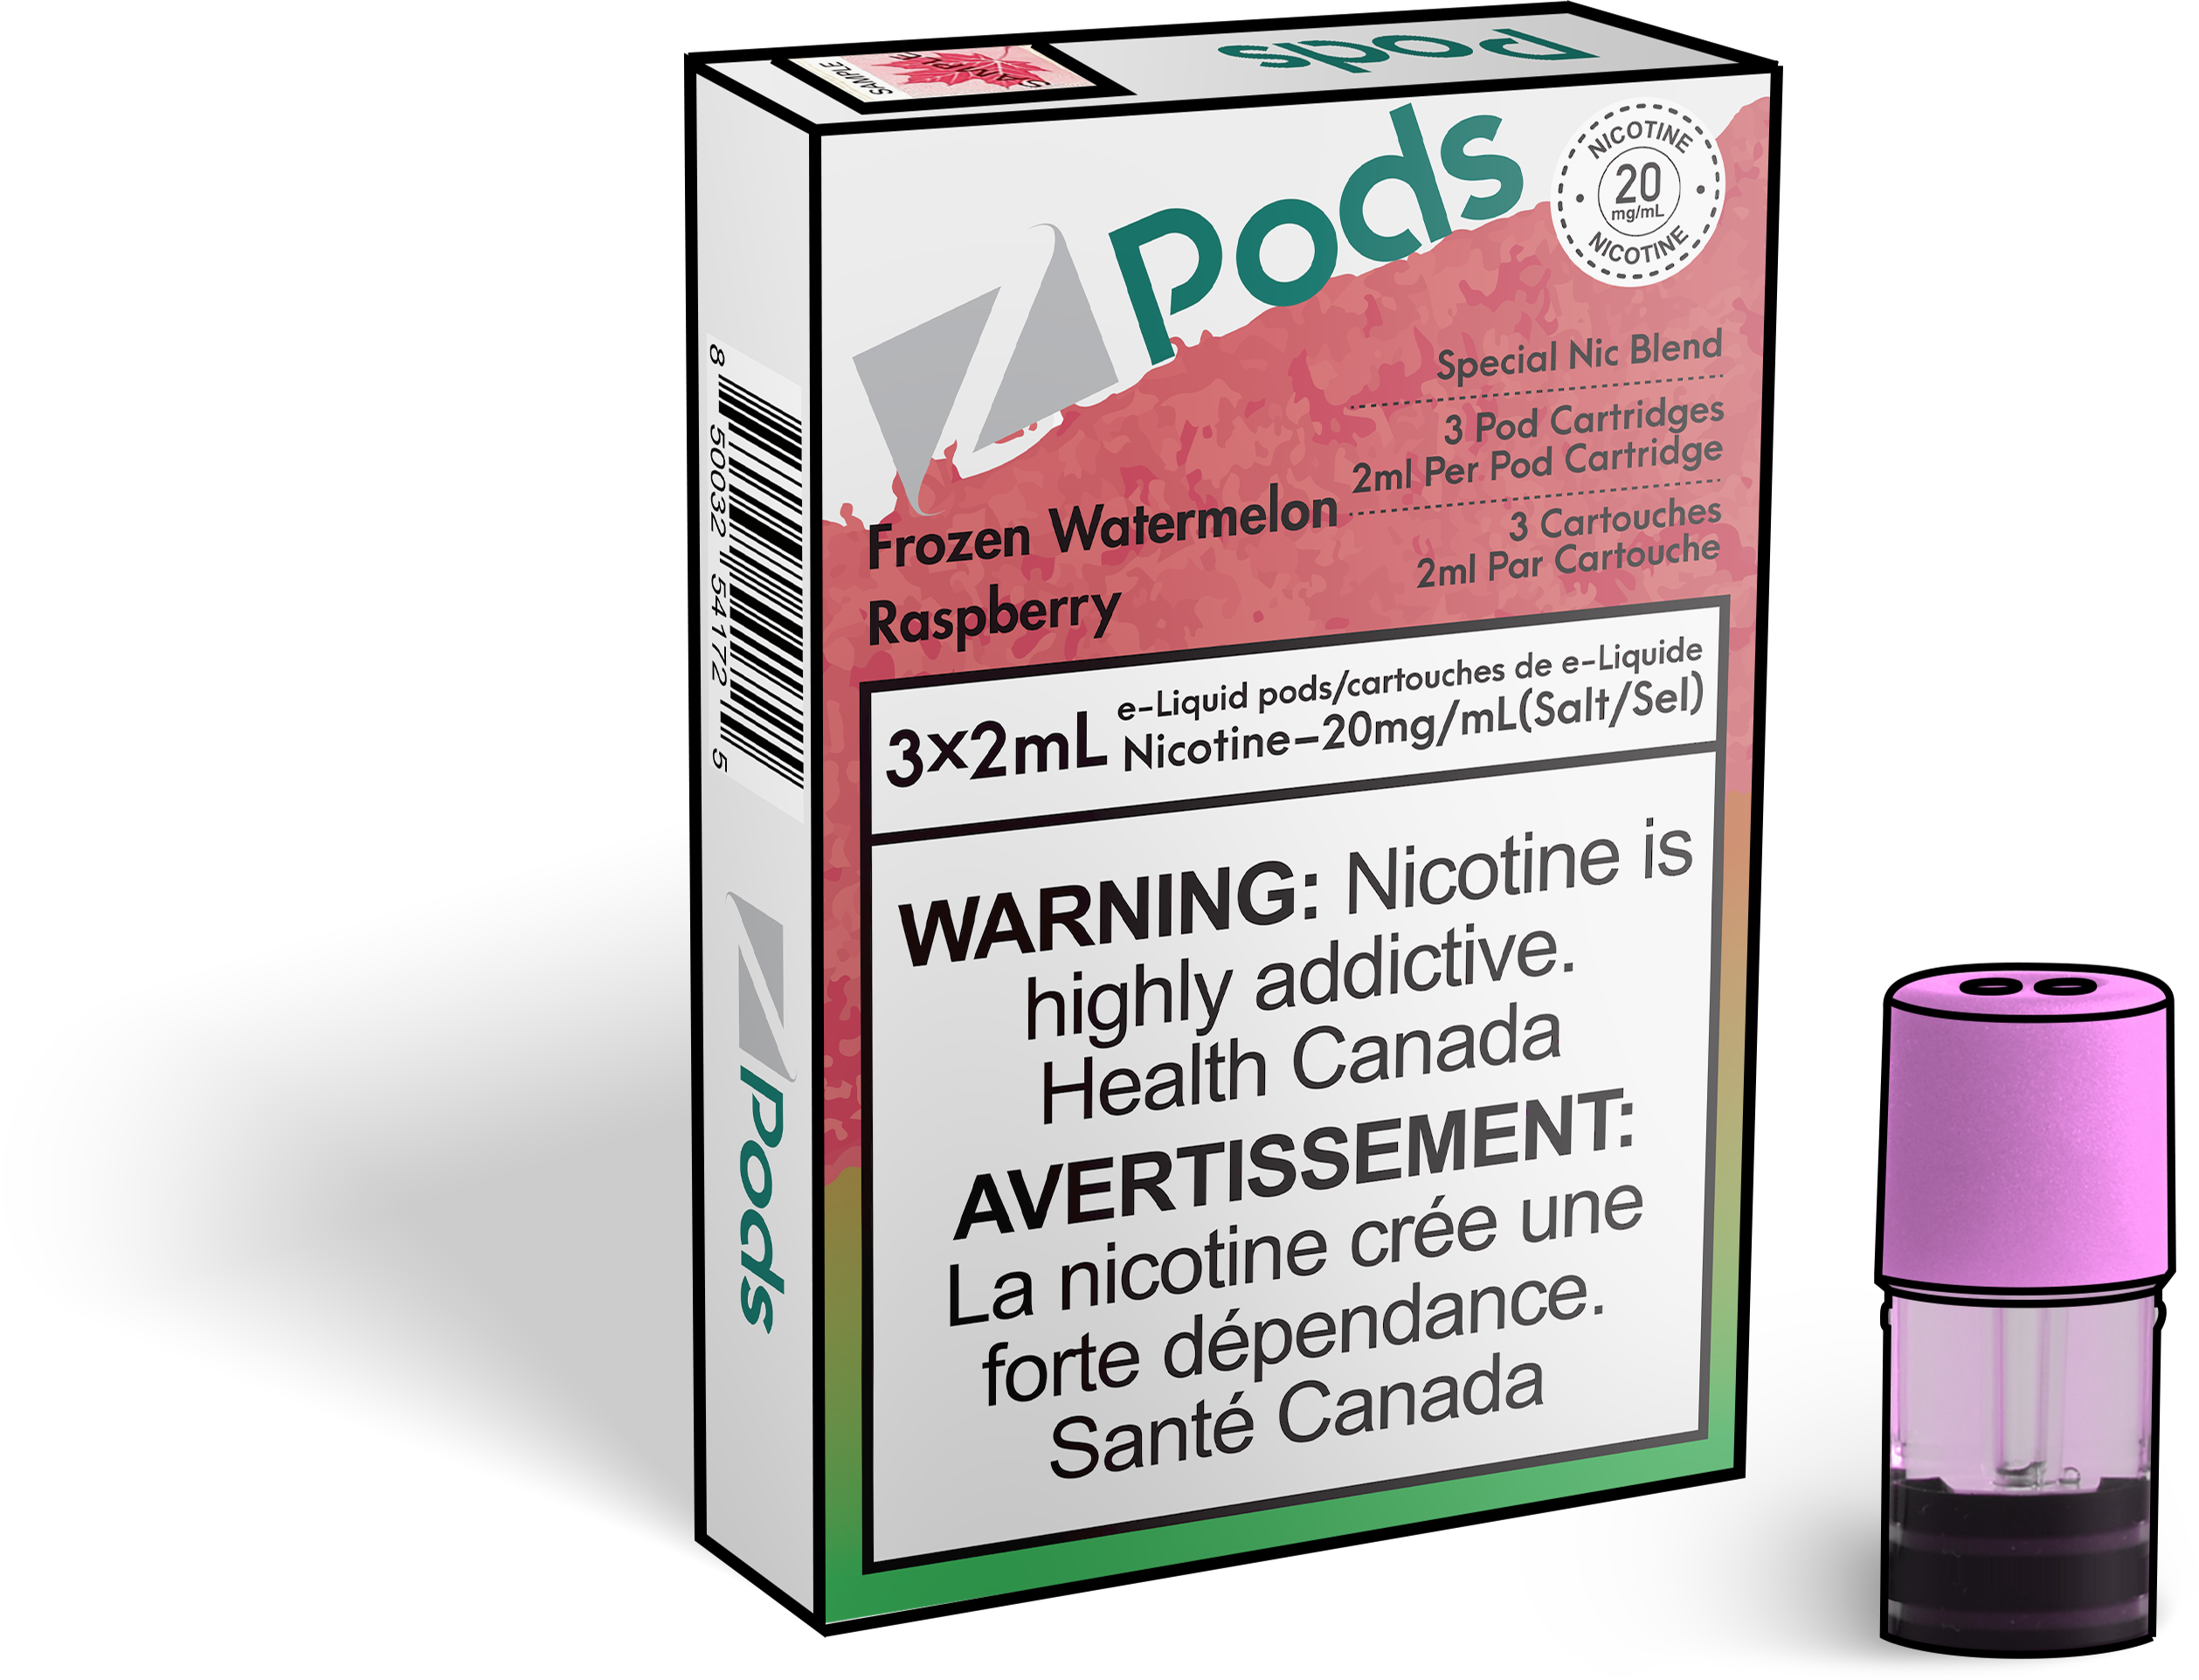 Zpods-frozenwatermelonraspberry-Zpods-Offical-Vape-Store